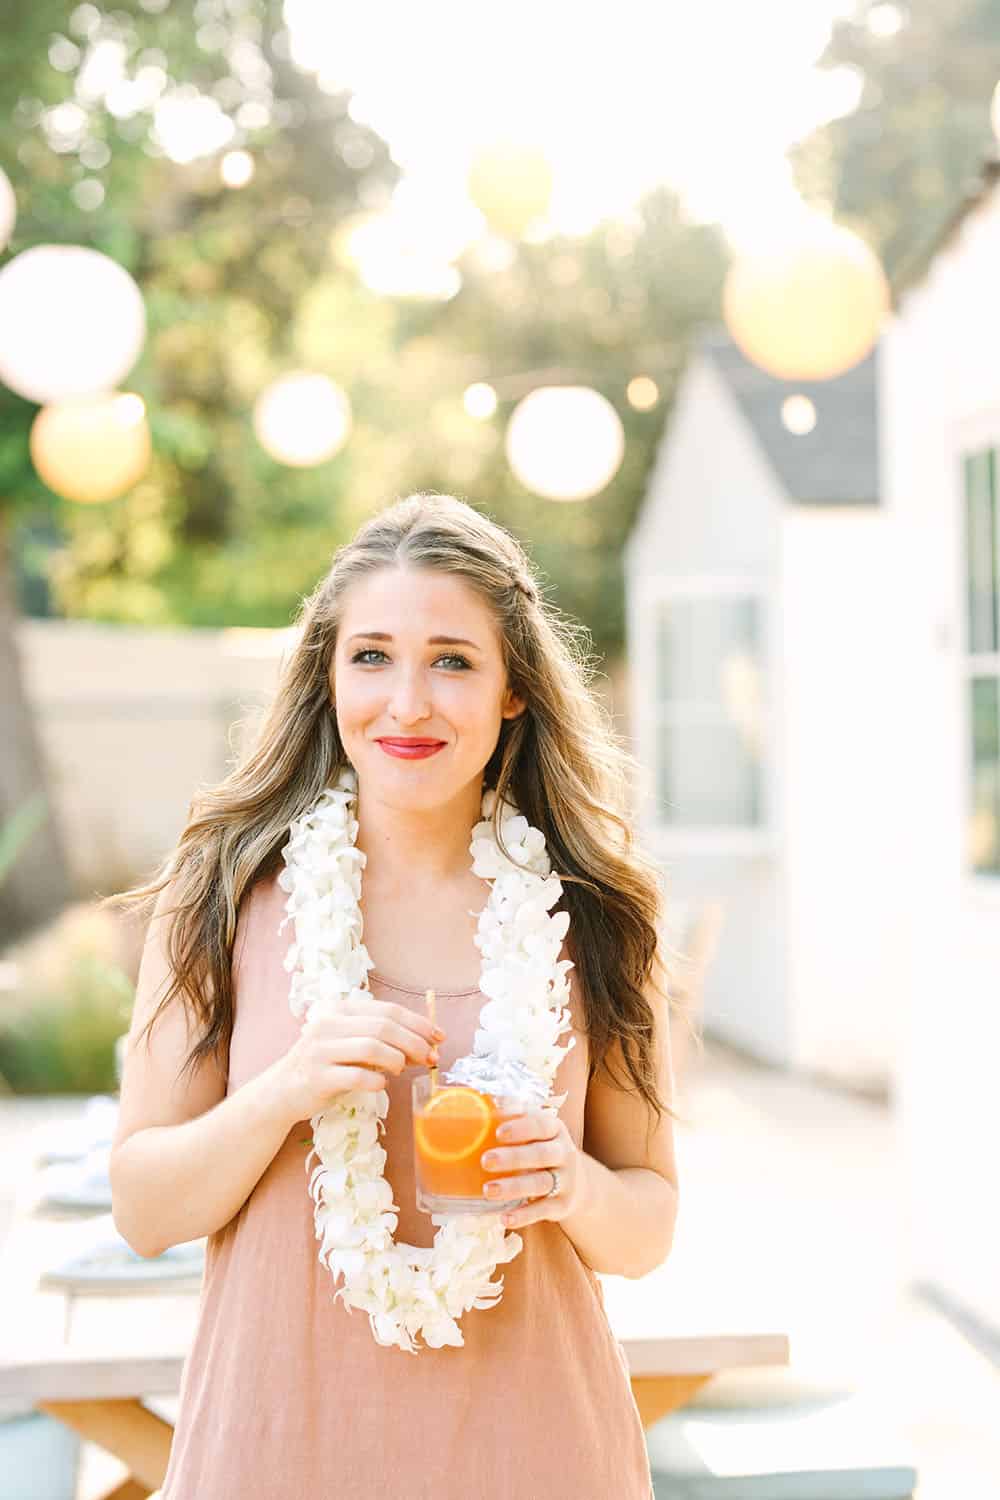 Eden Passante of Sugar and Charm wearing a fresh lei for her tropical party.